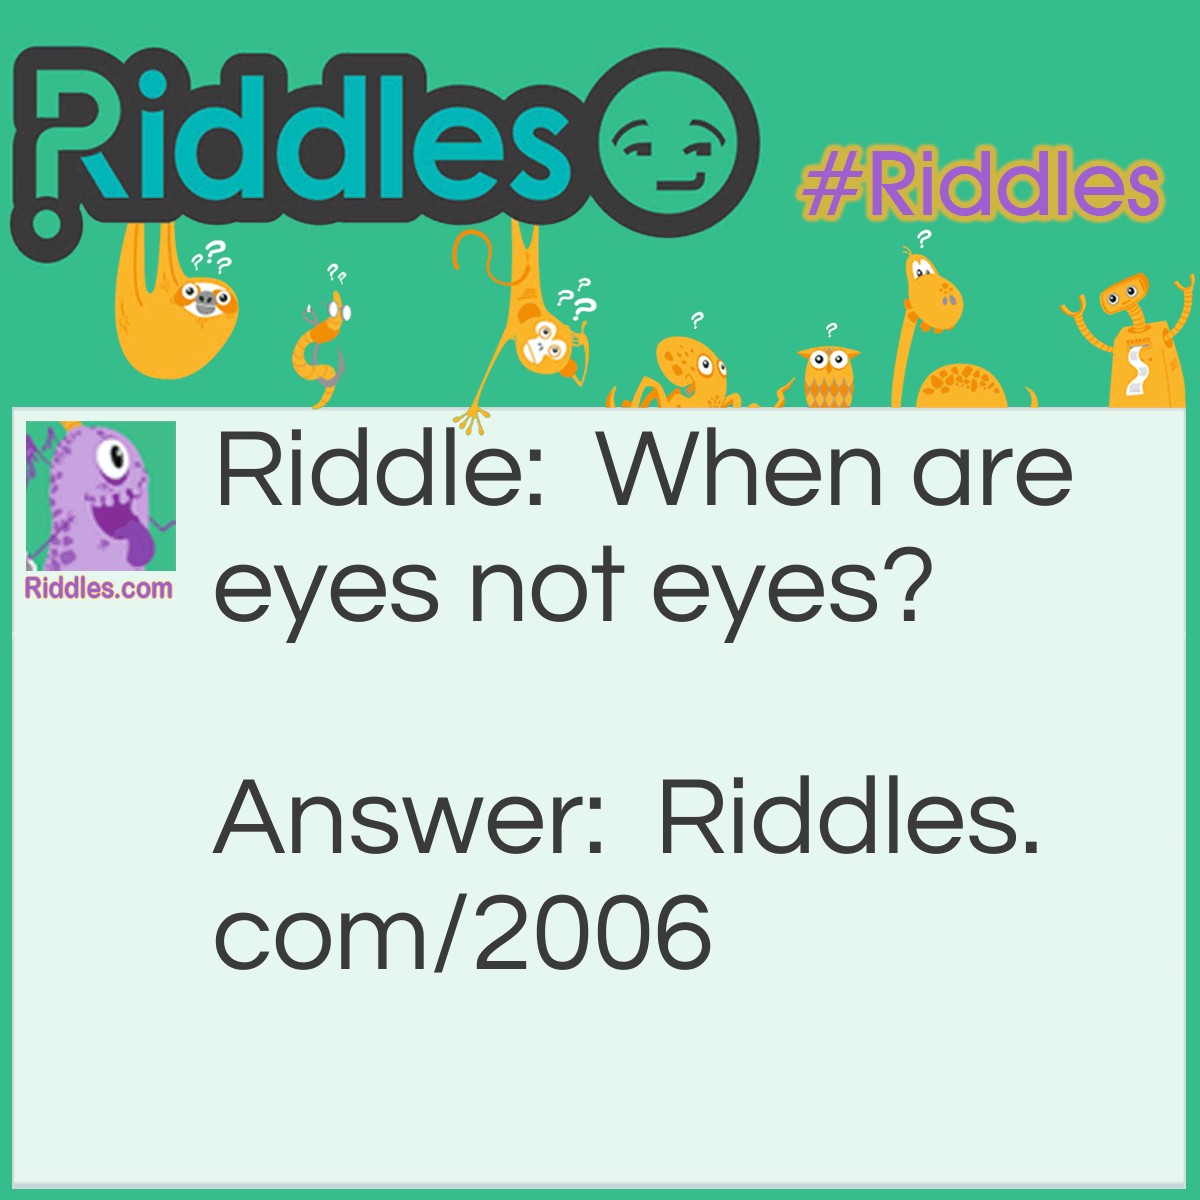 Riddle: When are eyes not eyes? Answer: When the wind makes them water.